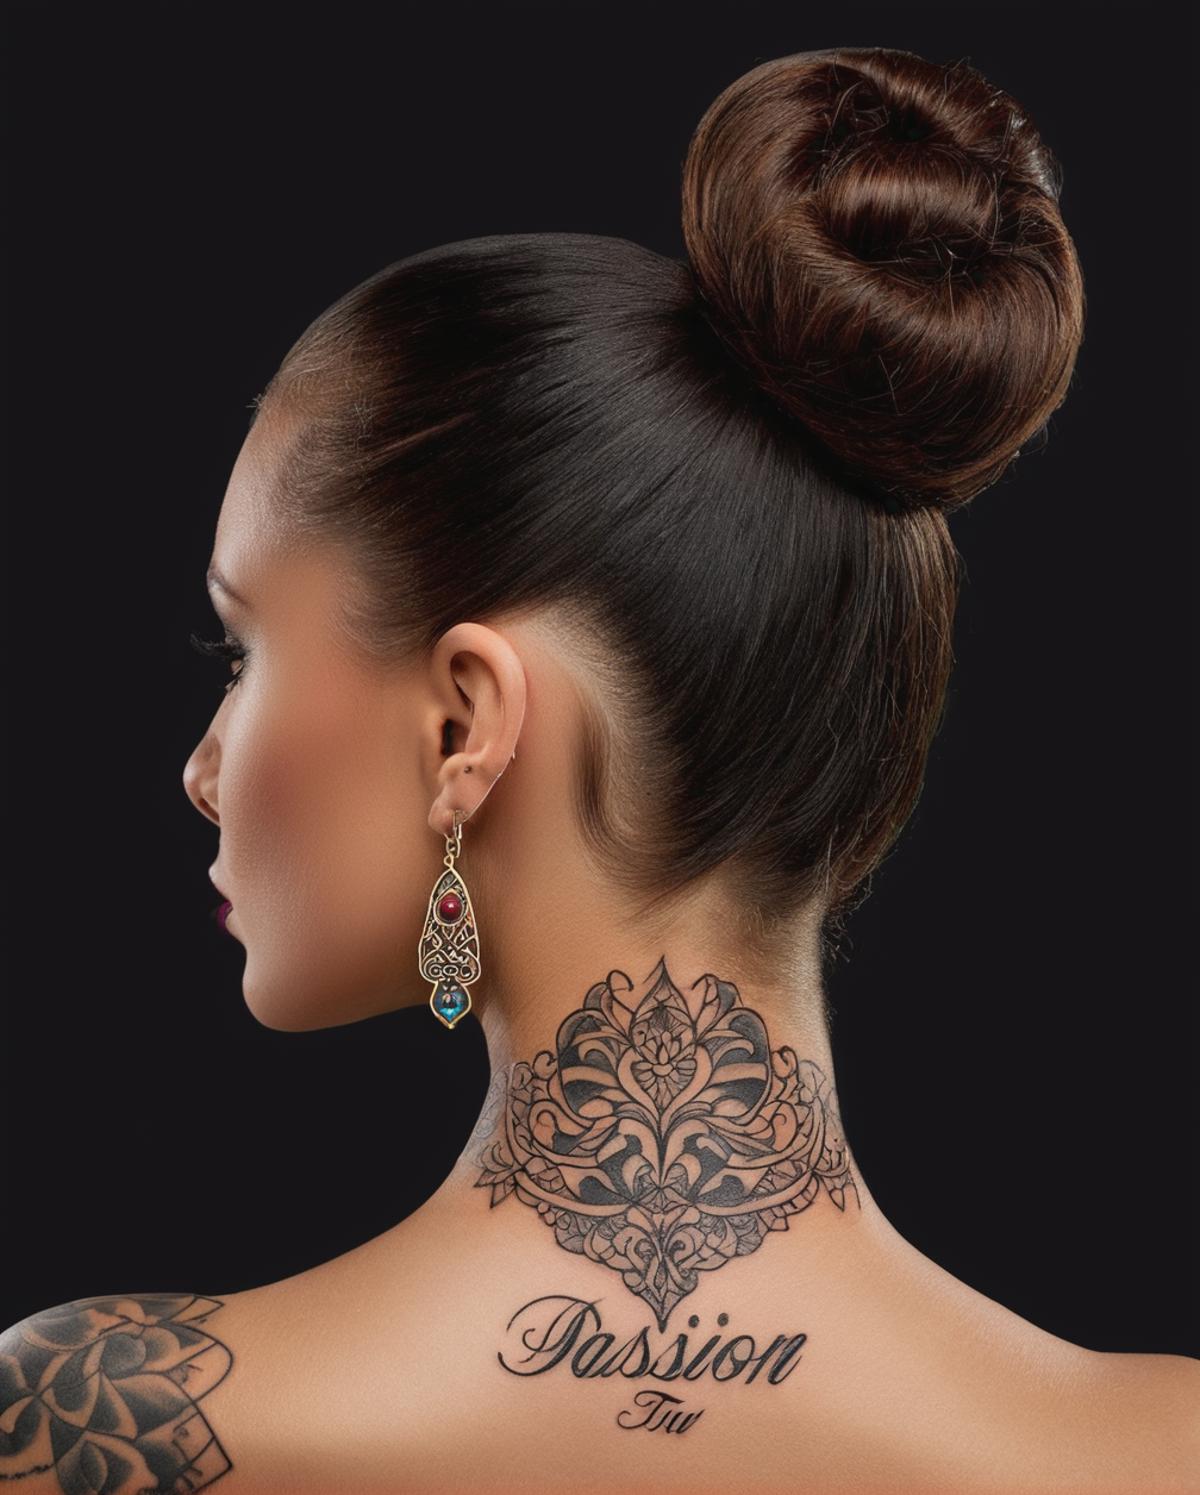 A woman with a tattoo on her neck in the form of a word and wearing earrings.